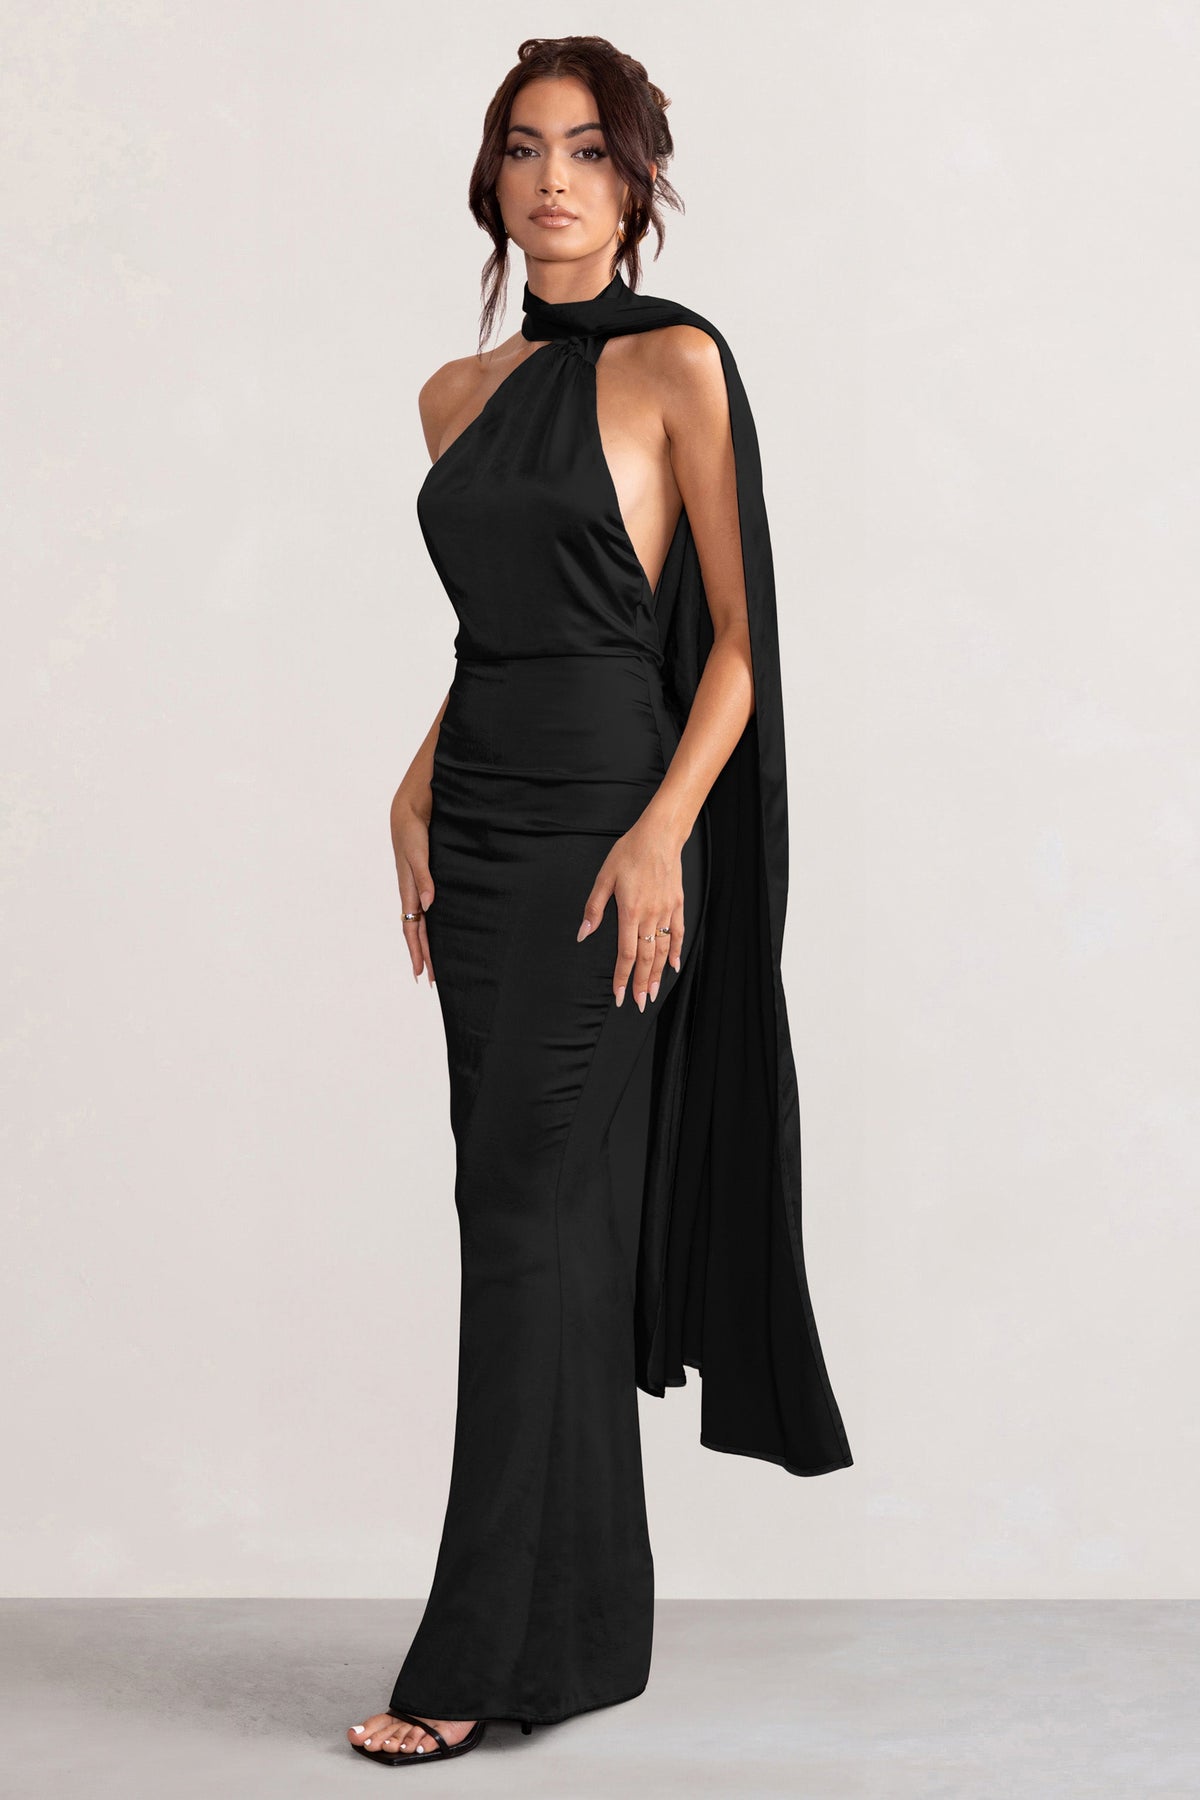 Black and gold | Graduation dresses long, Prom outfits, Black gown dress